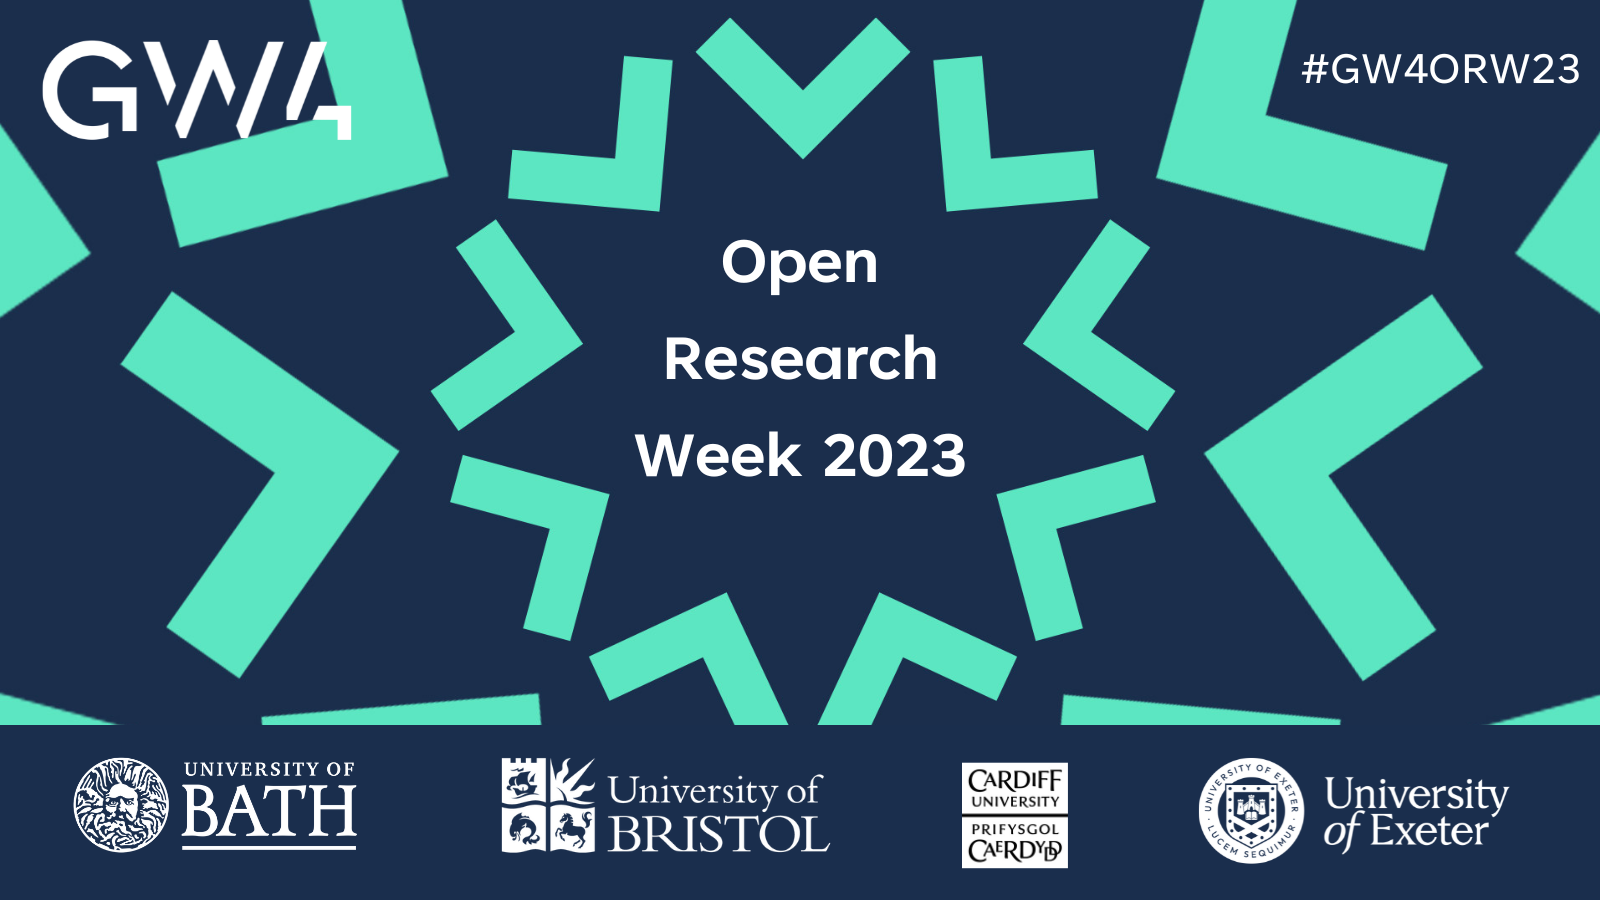 GW4 Open Research Week 2023 graphic